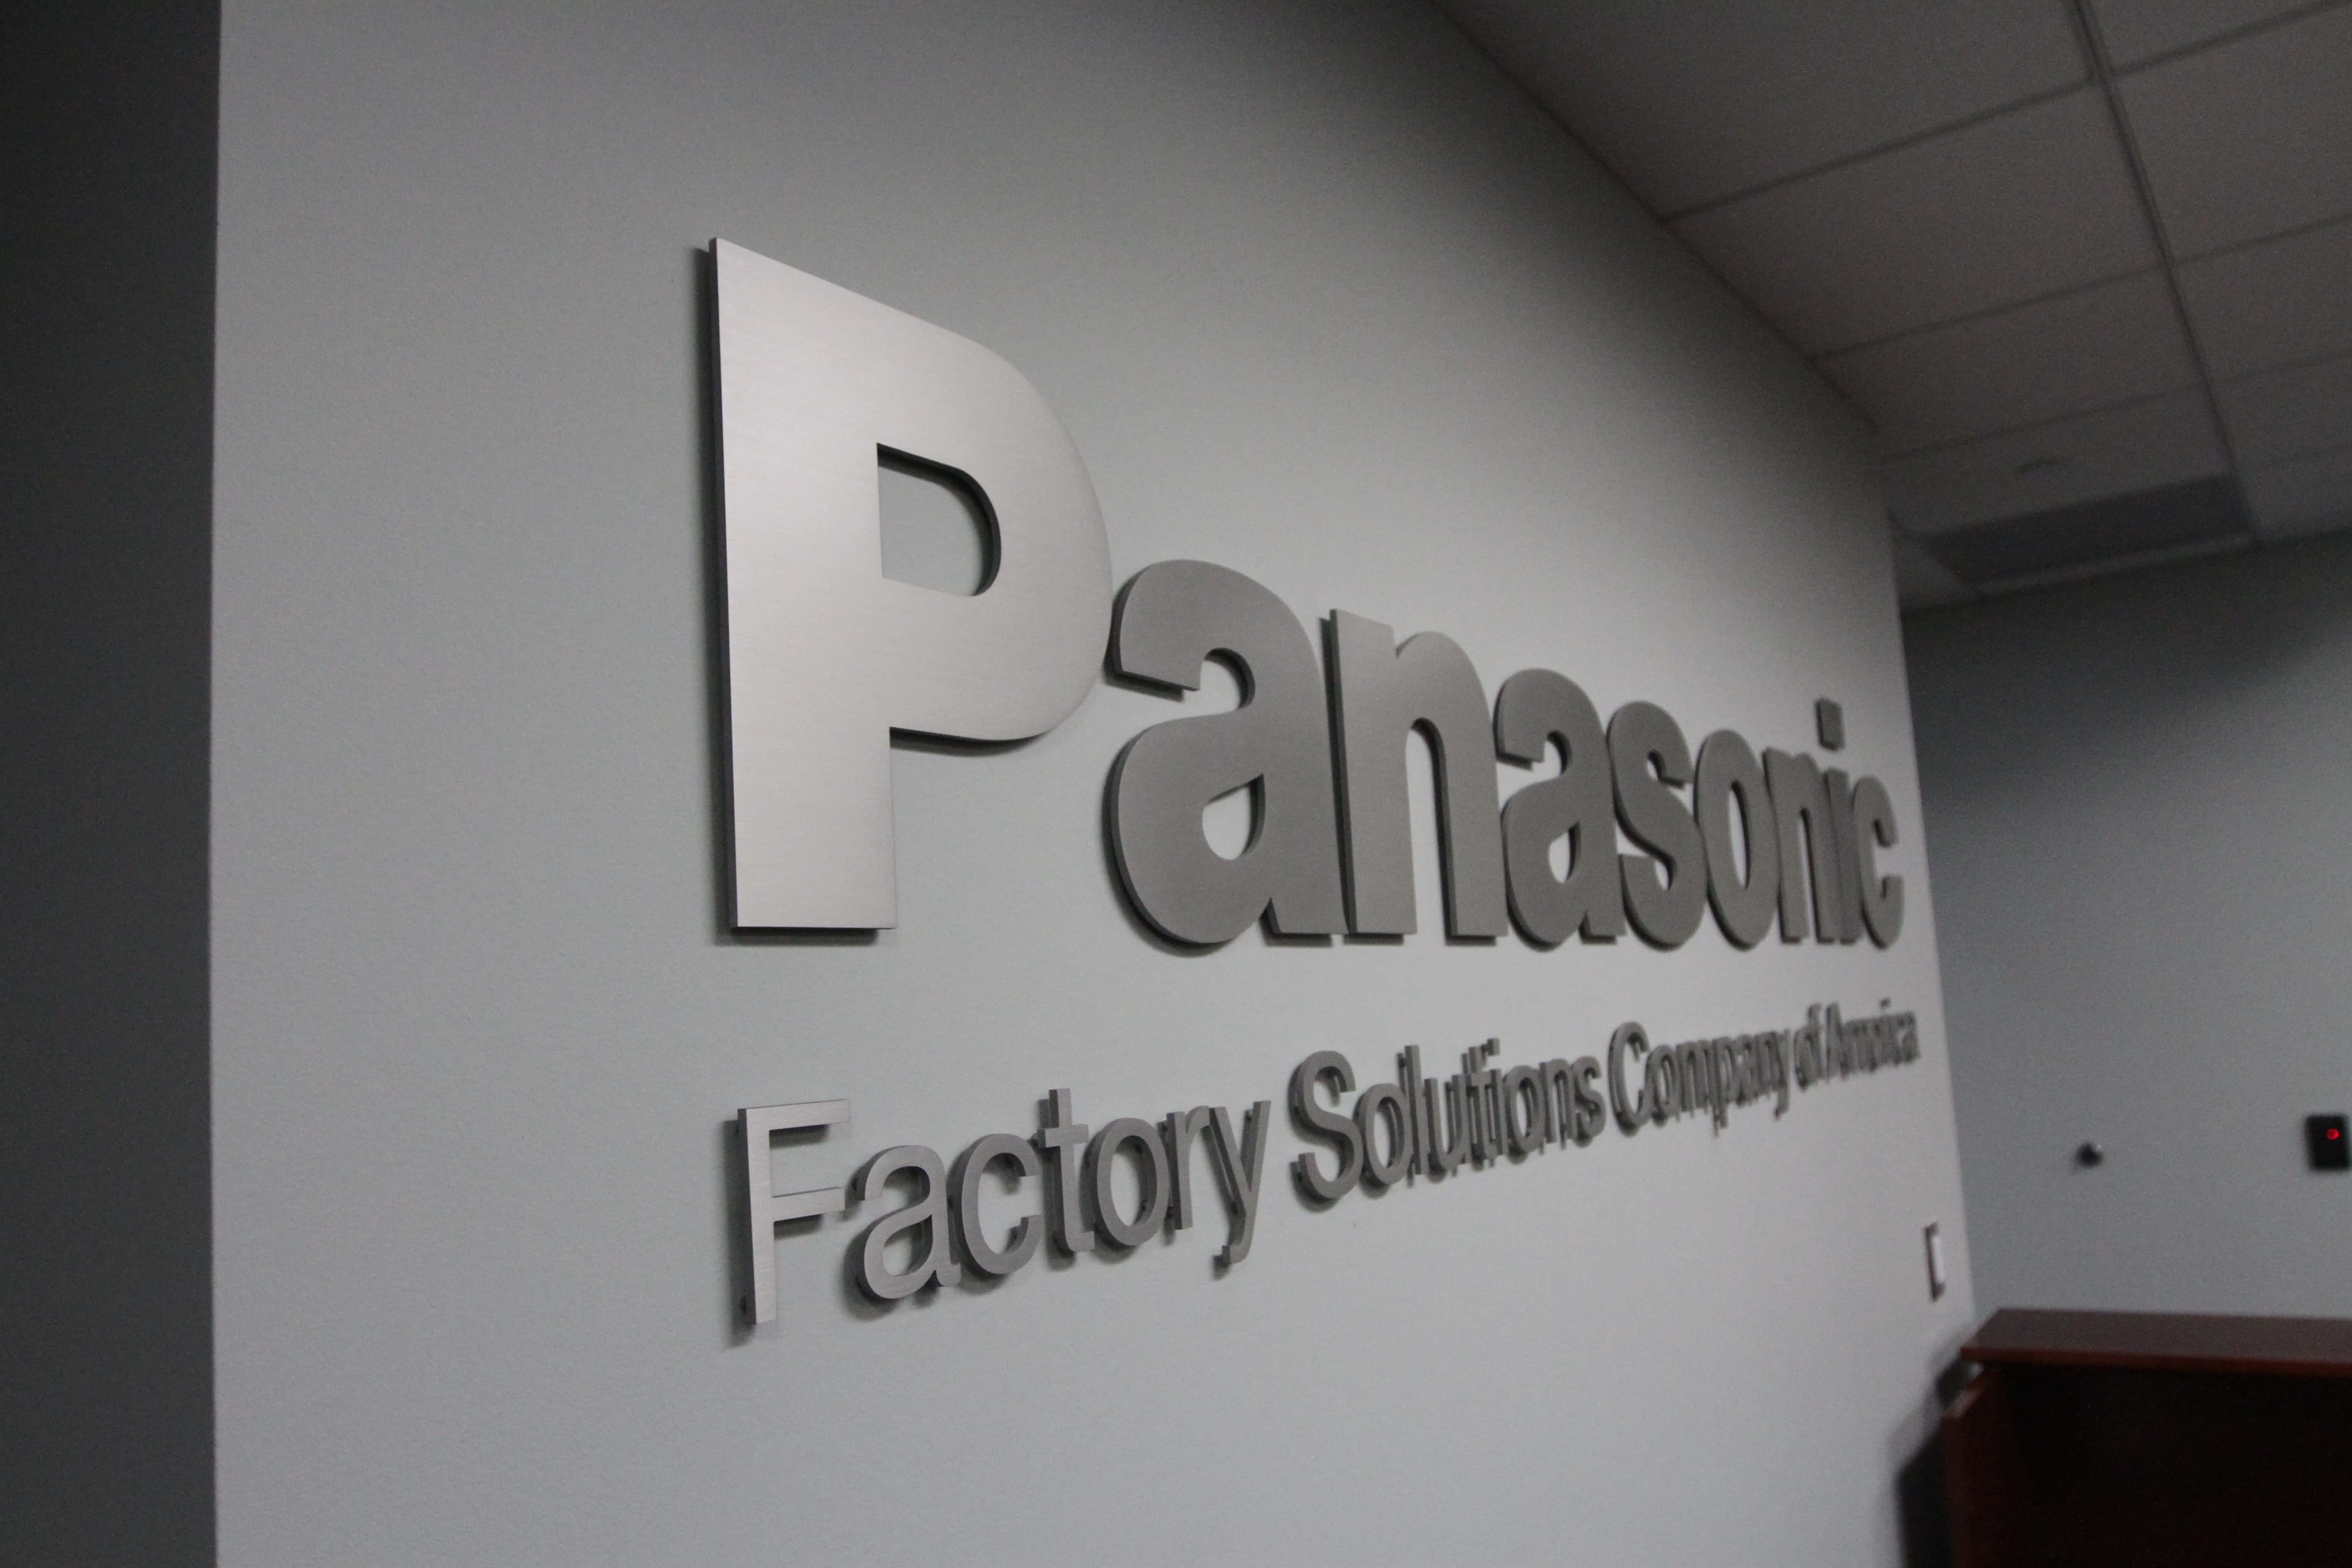 Custom laser cut metal sign for Panasonic Factory Solutions Office